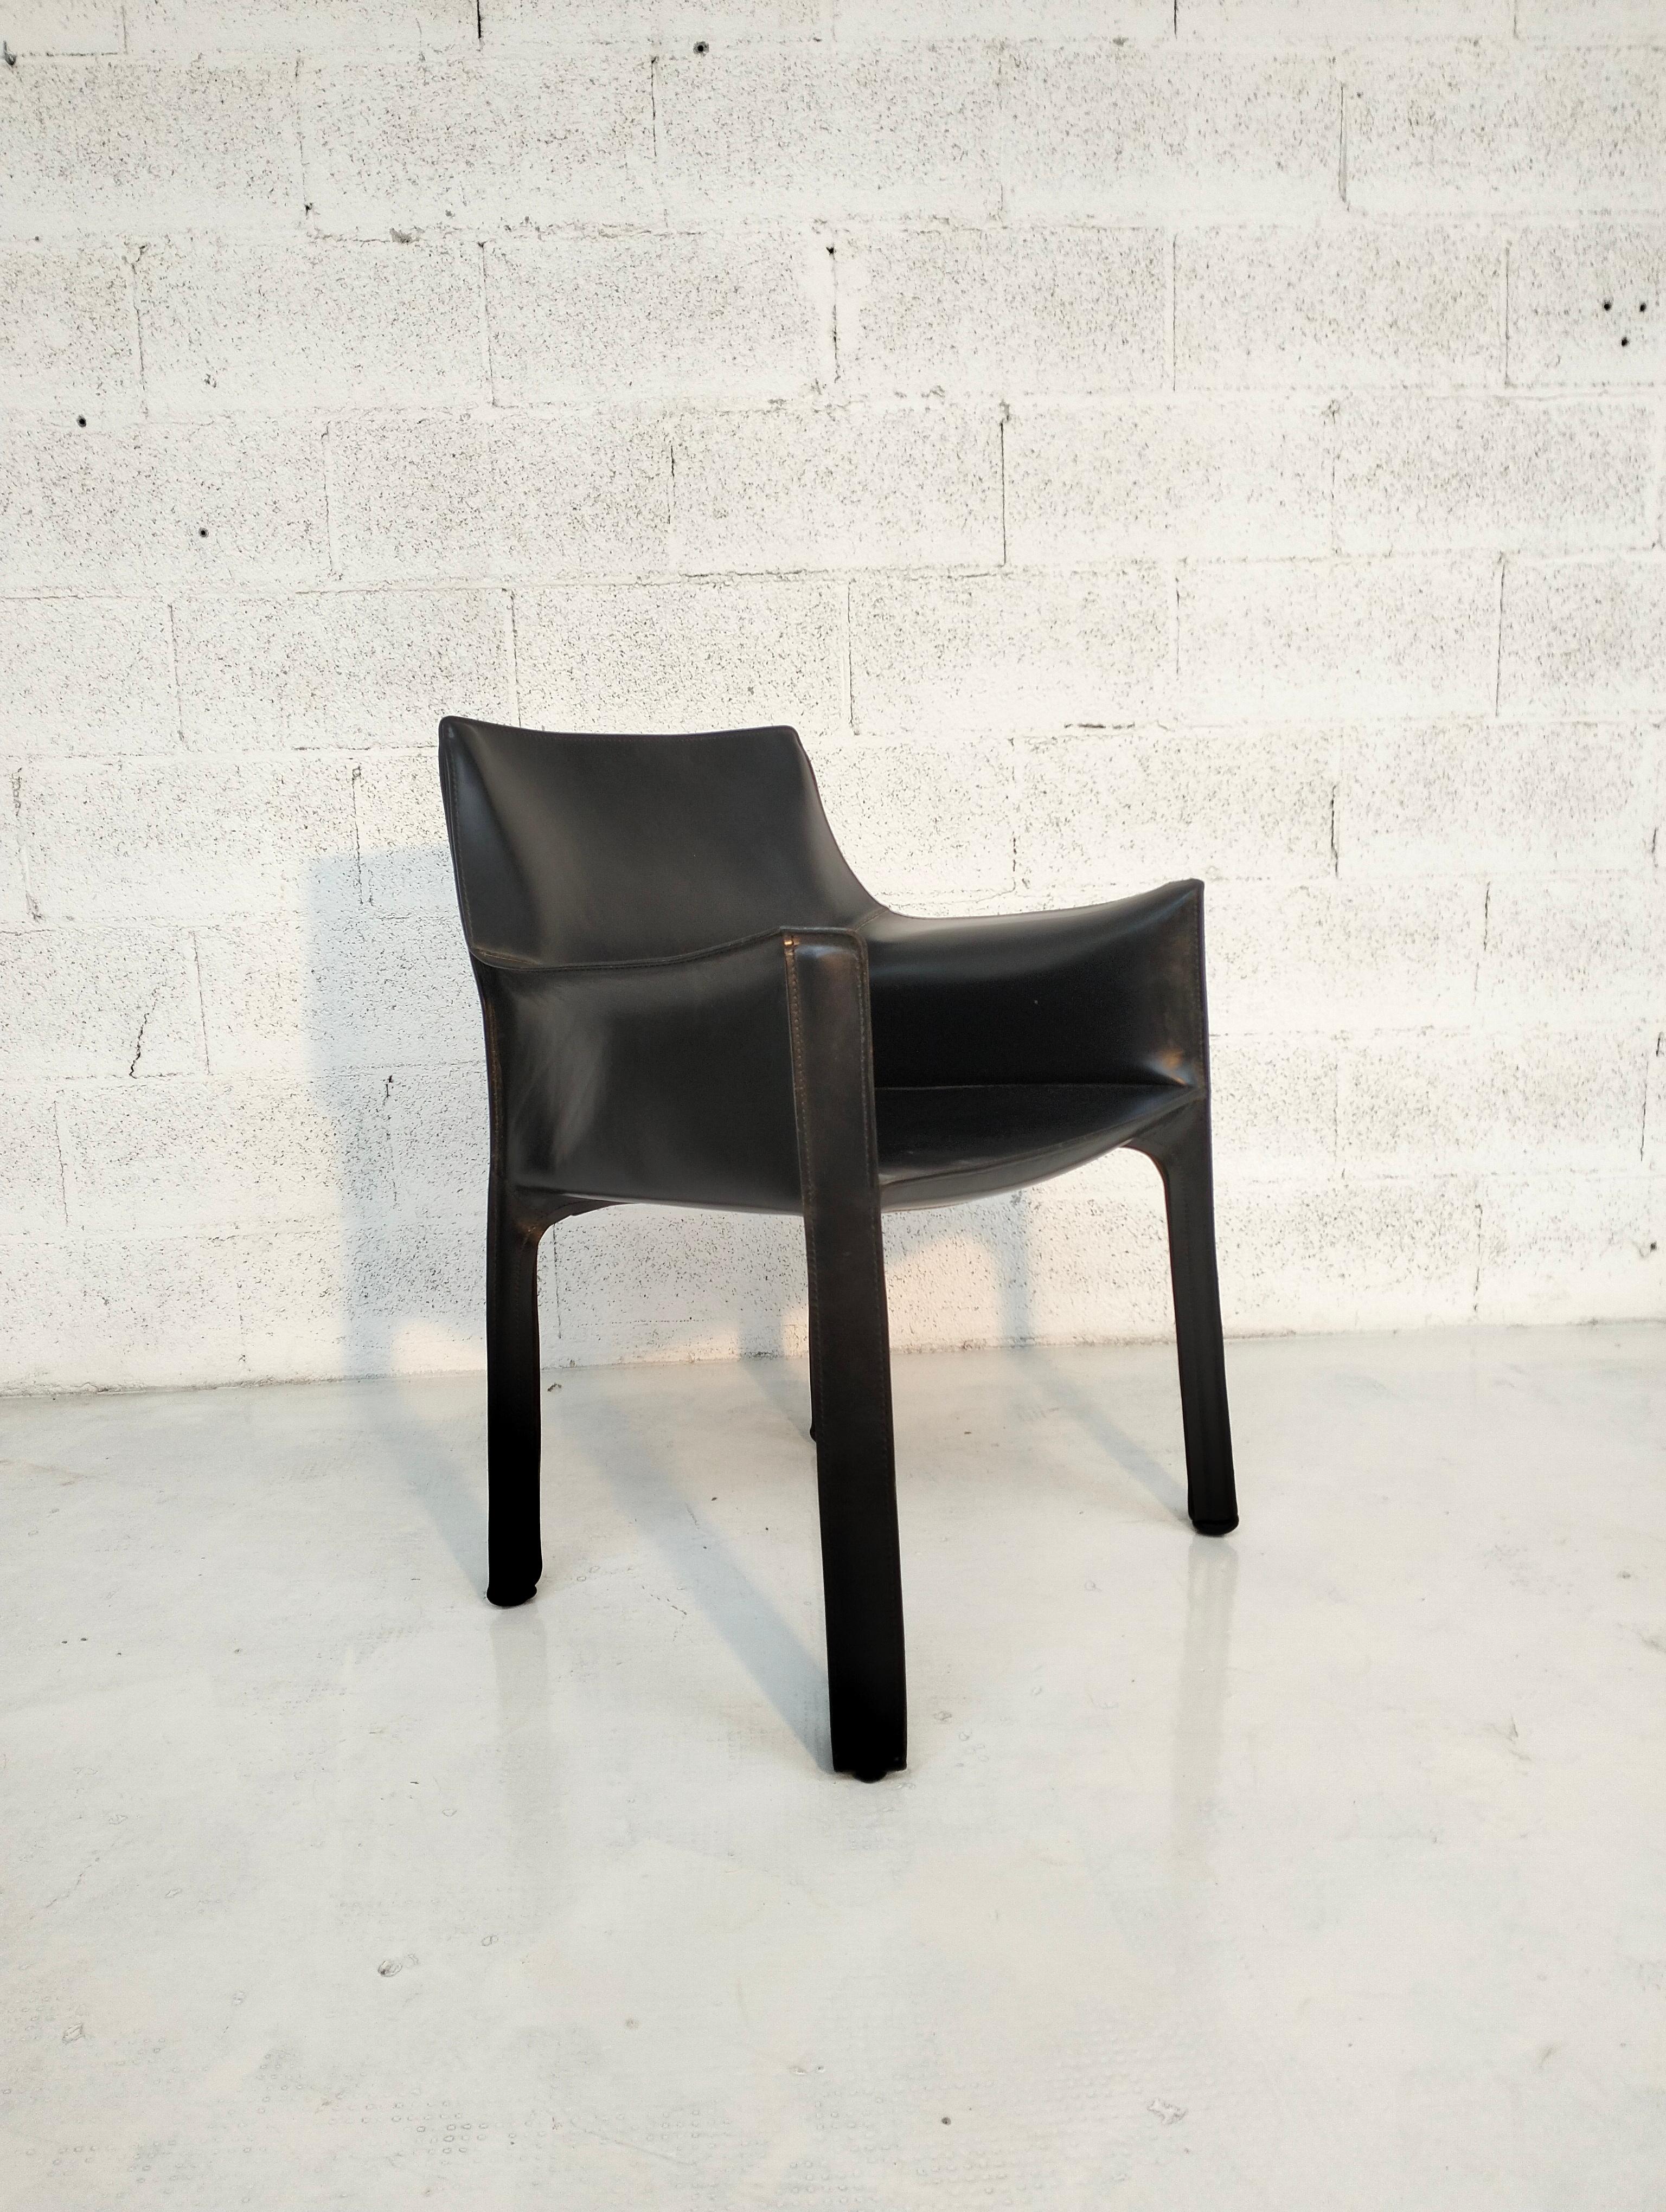 THE ICONIC SEAT BY MARIO BELLINI
Cab is the first chair in the world featuring a self-supporting leather structure inspired by the relationship between the skeleton of the human body and skin. Comfortable and welcoming, it embodies Cassina's